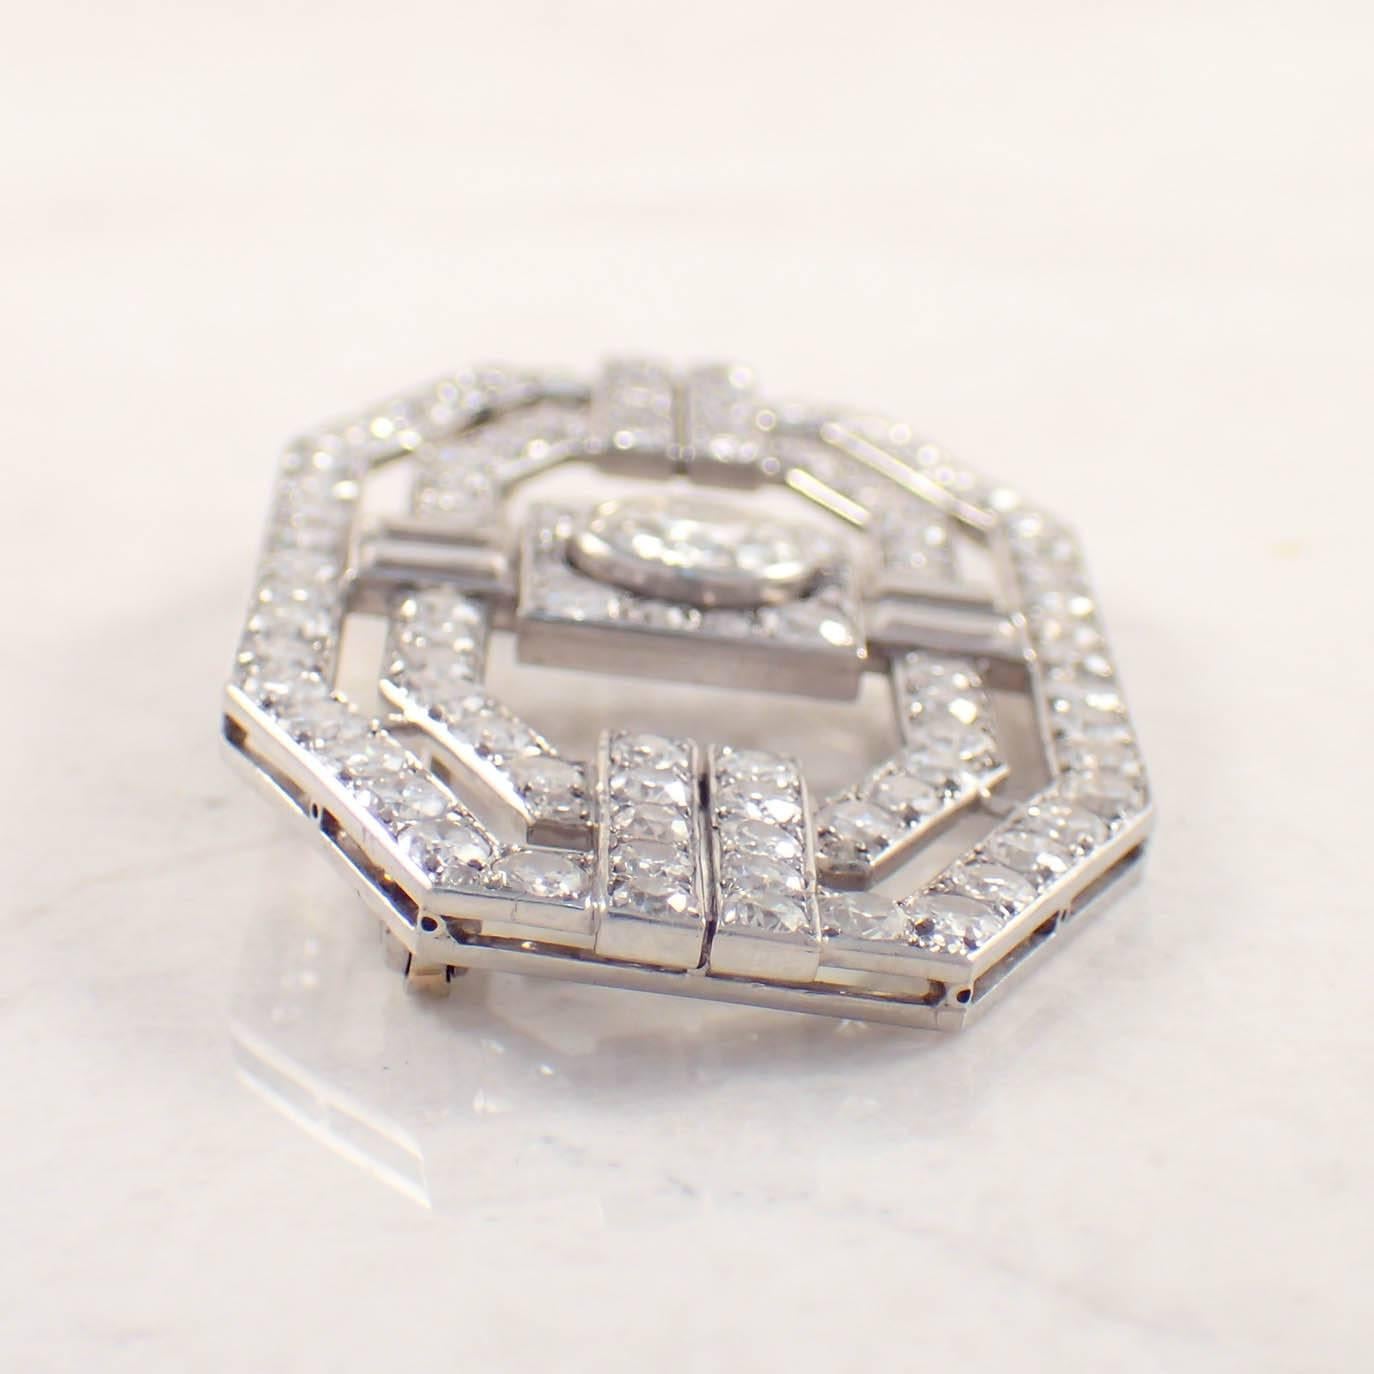 Art Deco diamond platinum La Cloche brooch. The open work, shield shaped brooch is centered by 1 collet set European cut diamond weighing approximately 1.40 carats, surrounded by 104 round diamonds weighing approximately 7.00 carats total and 4